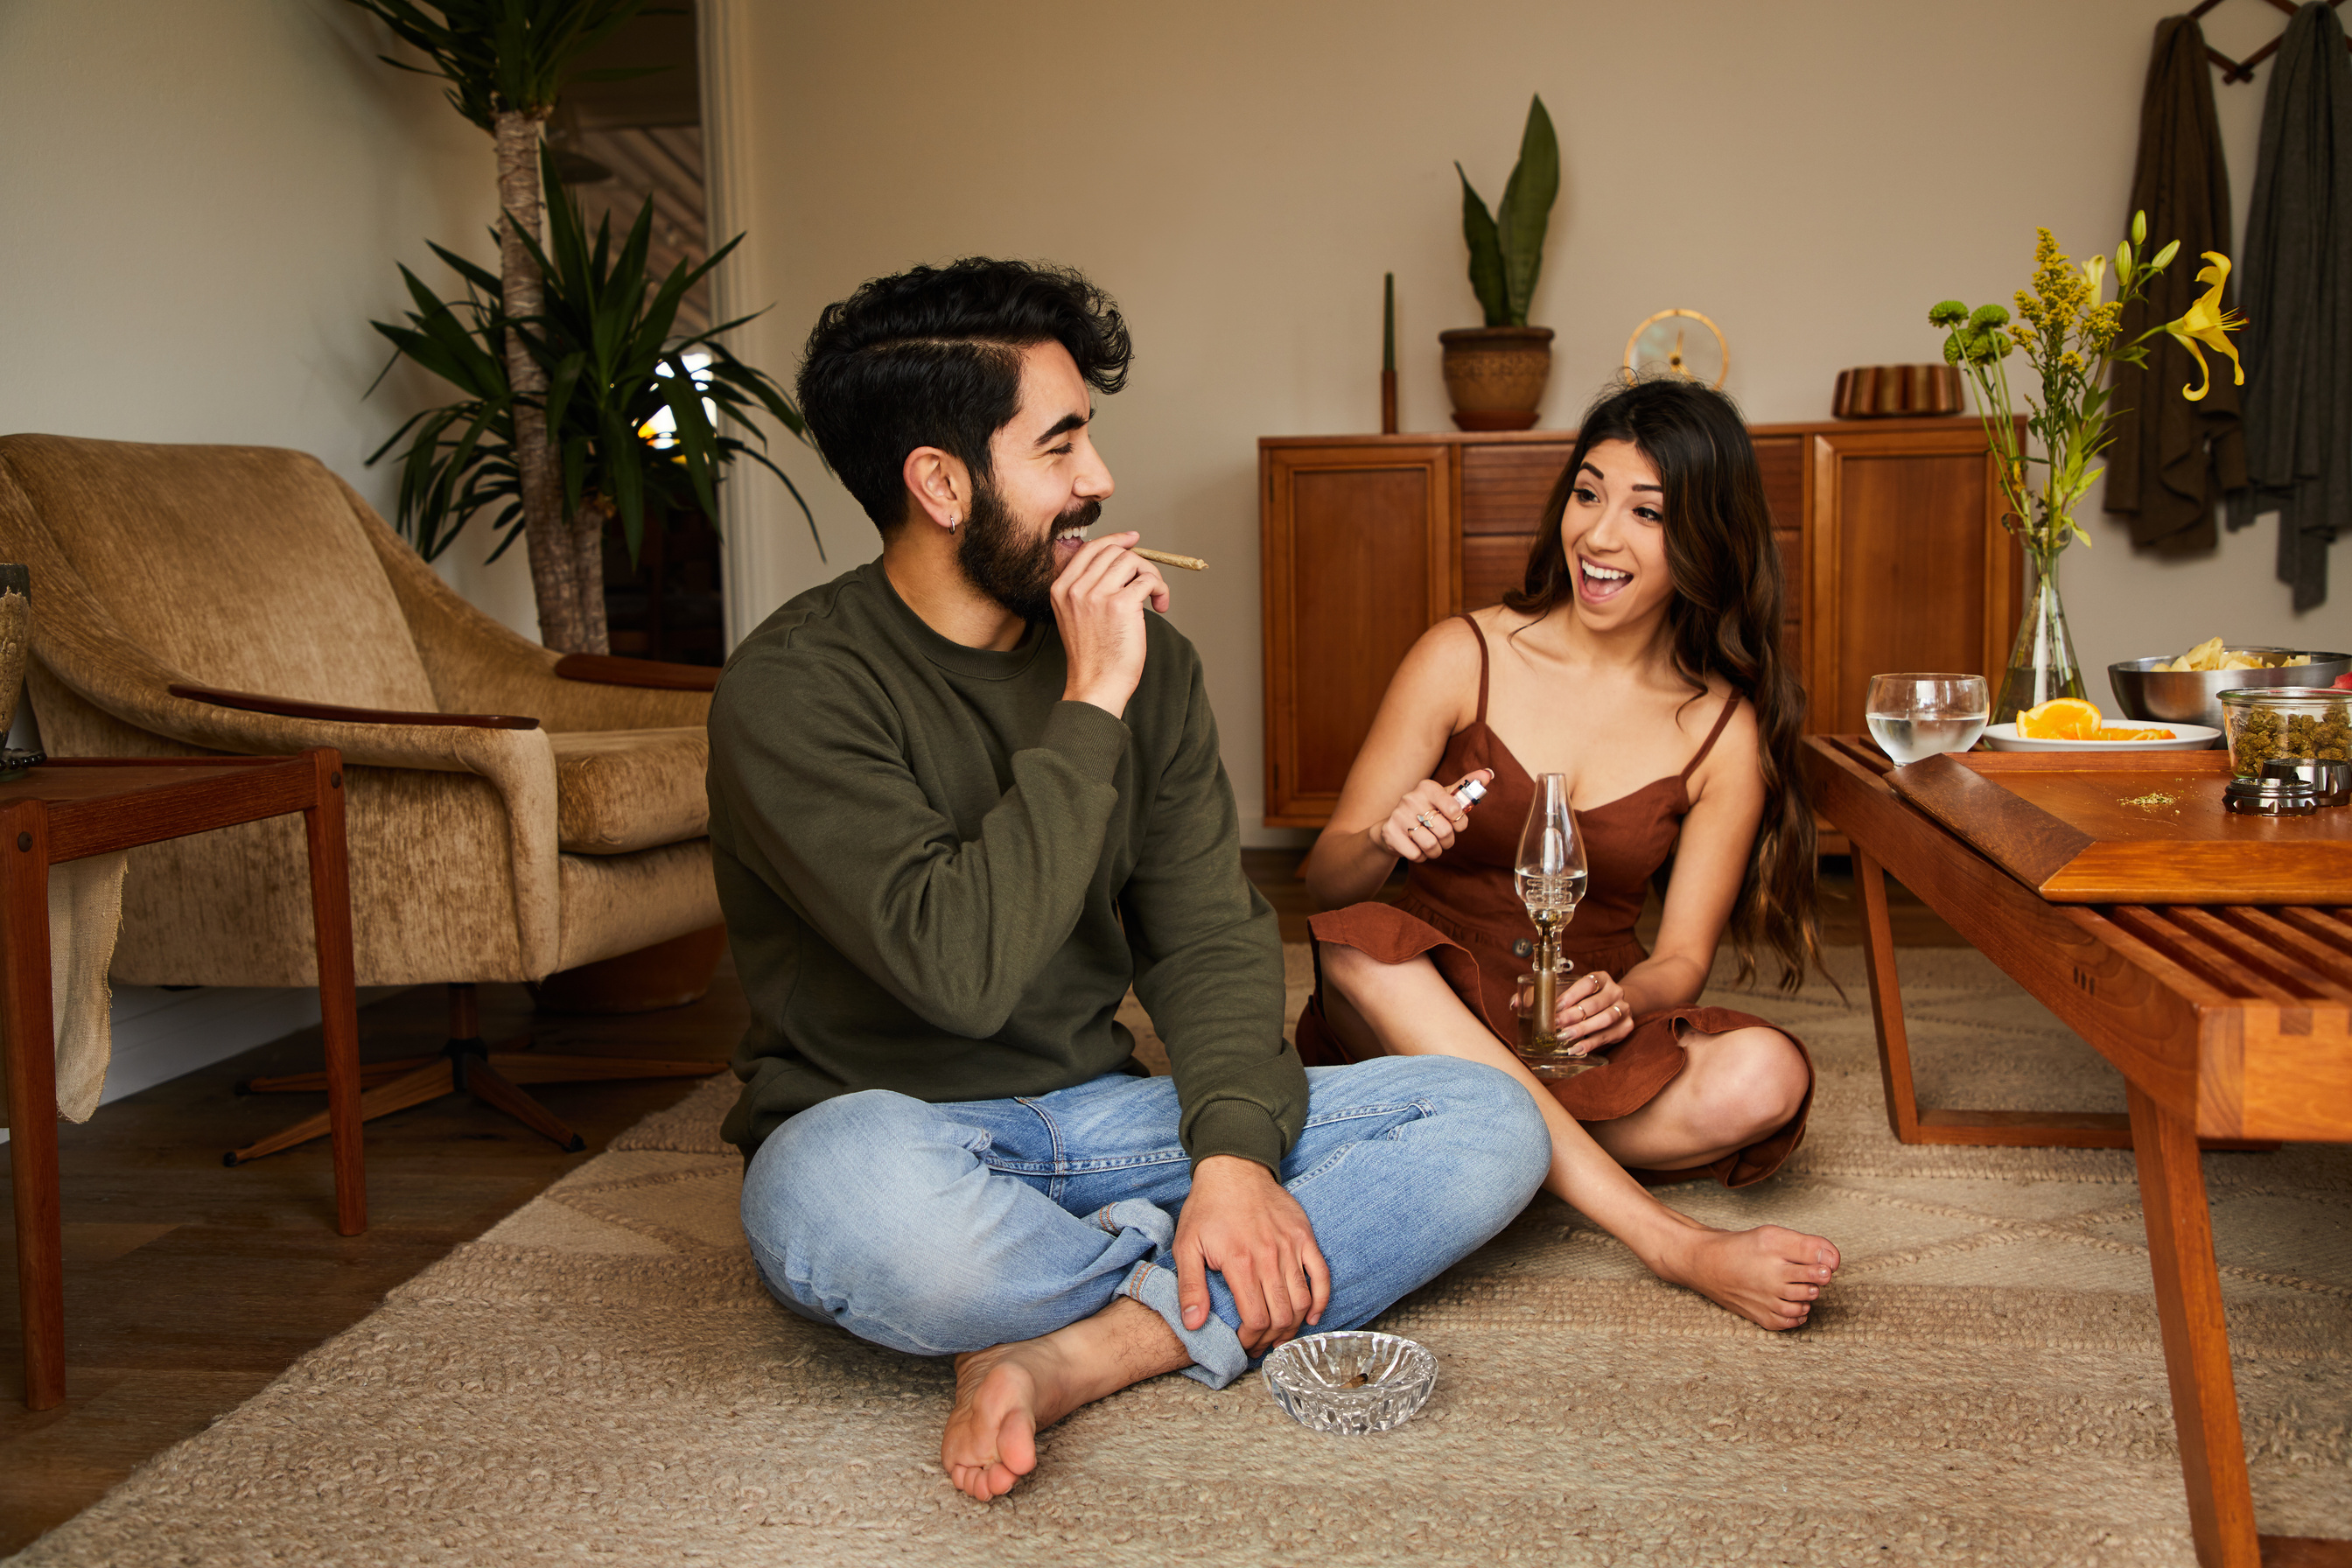 Laughing couple smoking together at home